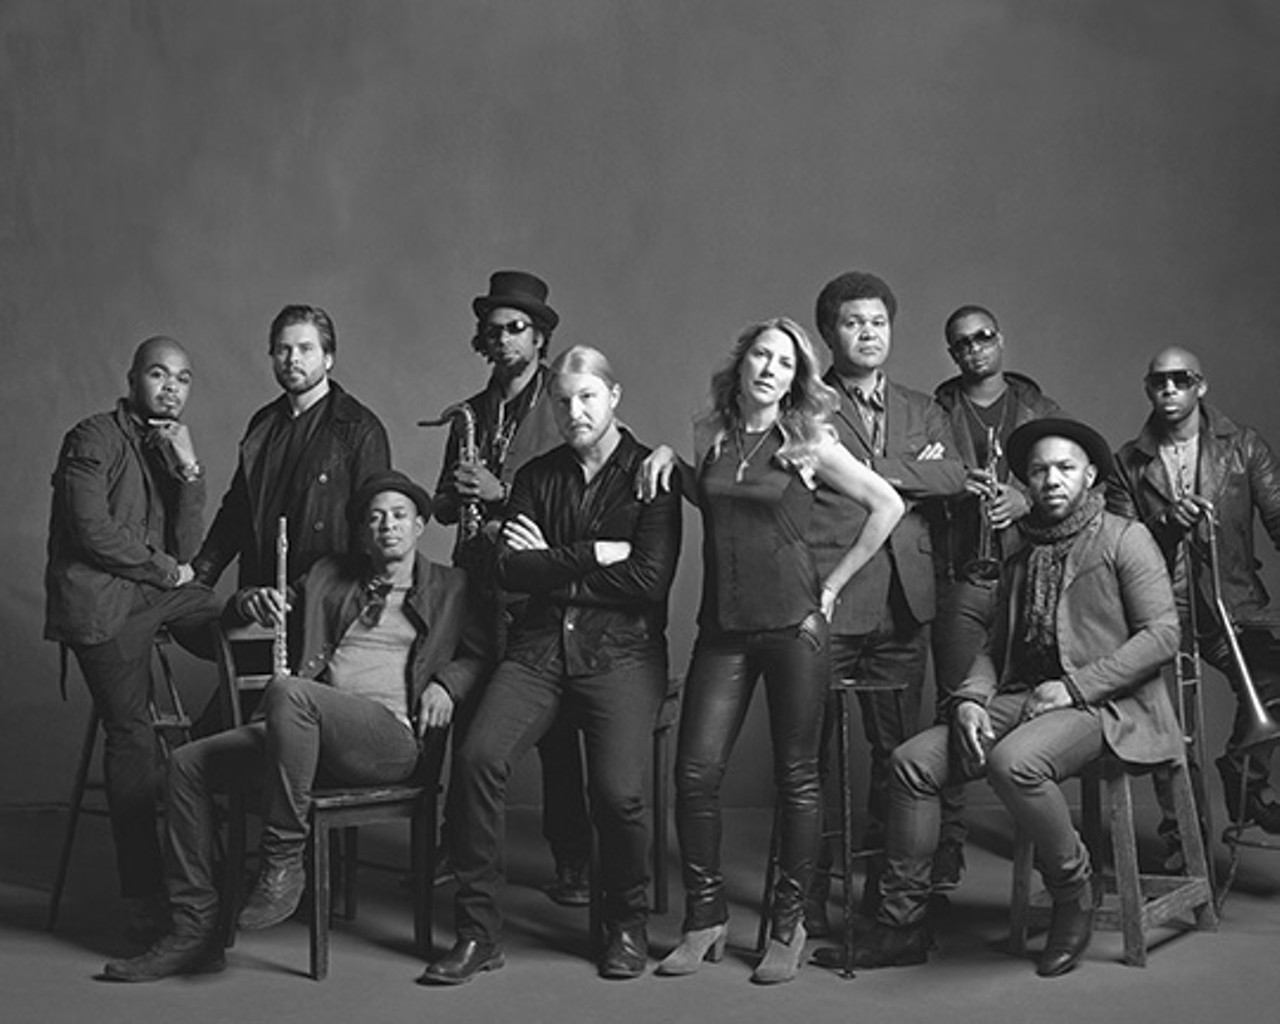 Announcing itself like an honest herd of buffalo hoofing it 'round the mountain, Tedeschi Trucks Band's latest album dives back into the waters of tradition and spirits its members know so well. Album opener and title track "Made Up Mind" has the band restored to the wonder of the first album, though there's a reinvigorated comfort and confidence to the music this time. Hear this song and more at their not-to-be-missed live performance on Friday the 13th at 7 p.m. at Jacobs Pavilion at Nautica. Tickets are between $34 and $89. (Sandy)